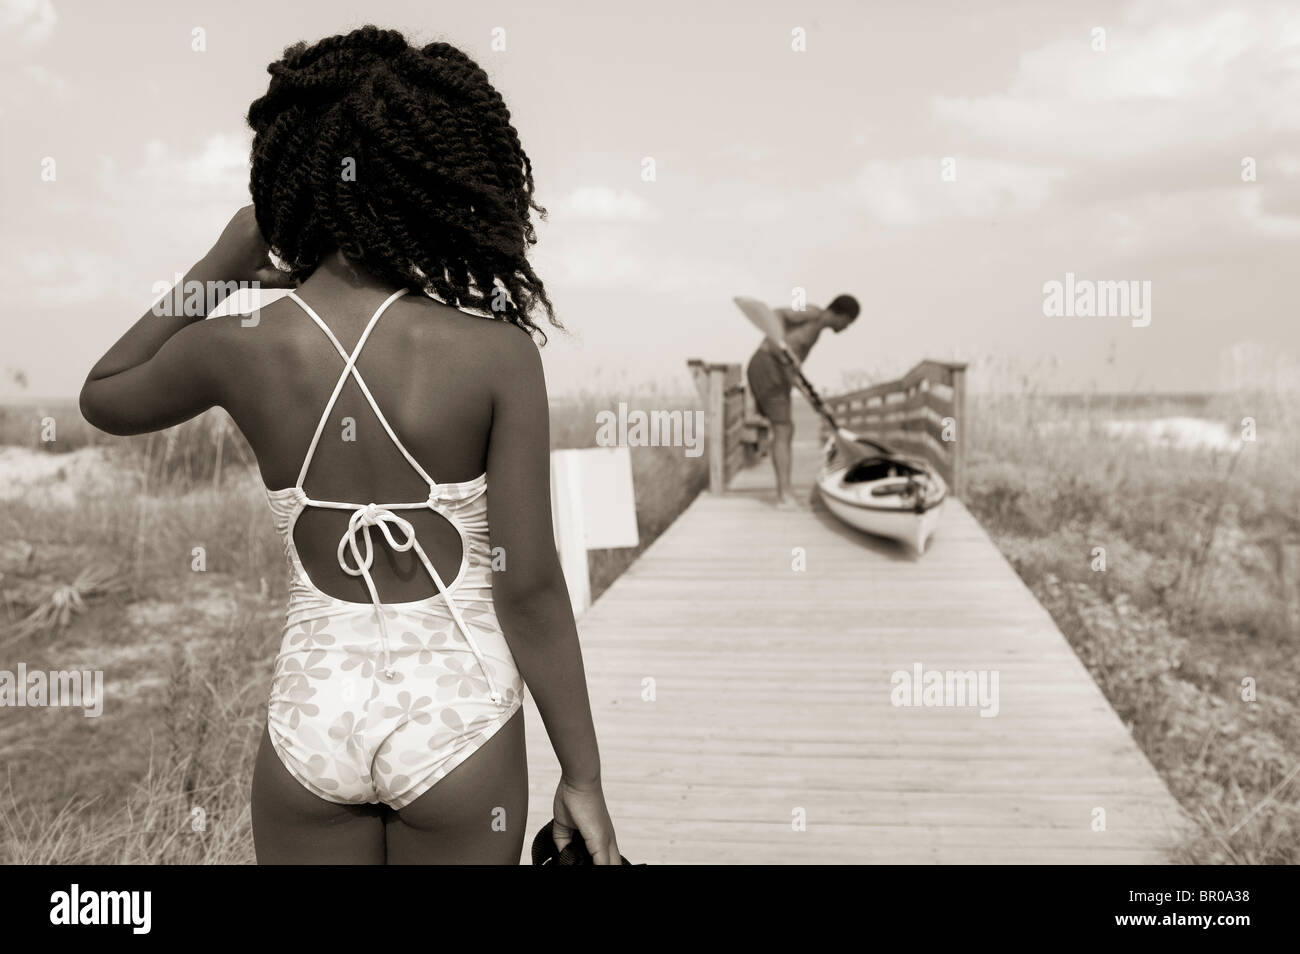 African American girl in swimming suit on Florida beach boardwalk with kayak and father Stock Photo